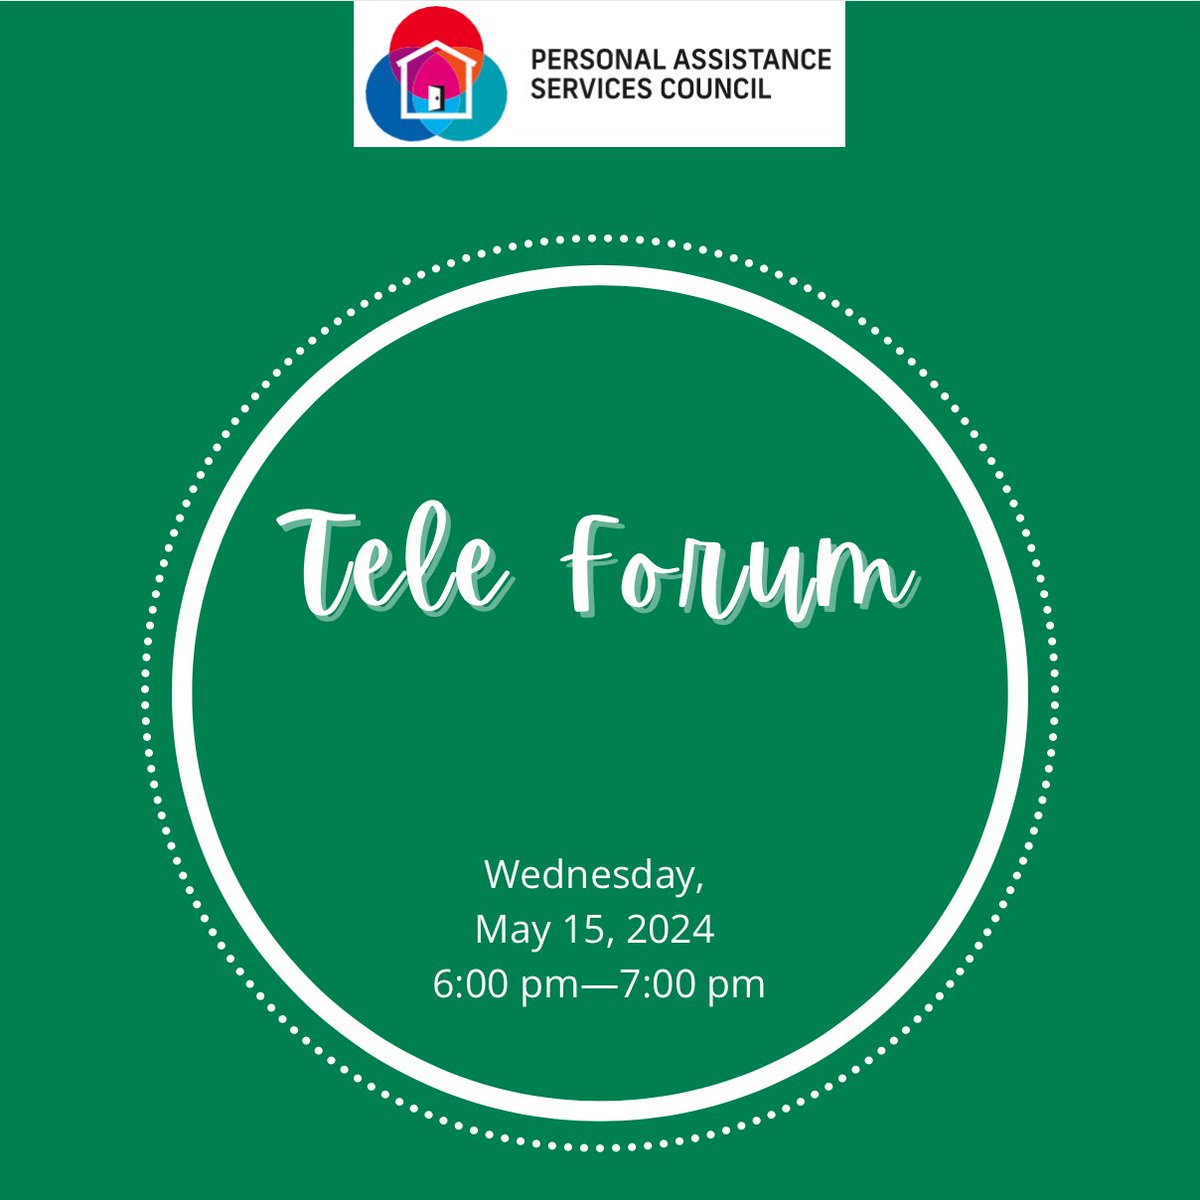 Join our Tele Forum tomorrow Wednesday! Register here-> bit.ly/3QgHnbx. Join us online, and watch the Tele Forum here -> bit.ly/3KBnGrt. Tele Forum dial-in number: 877-229-8493 Tele Forum ID code: 111563 #pasc #pascla #ihss #providers #caregivers #lacounty